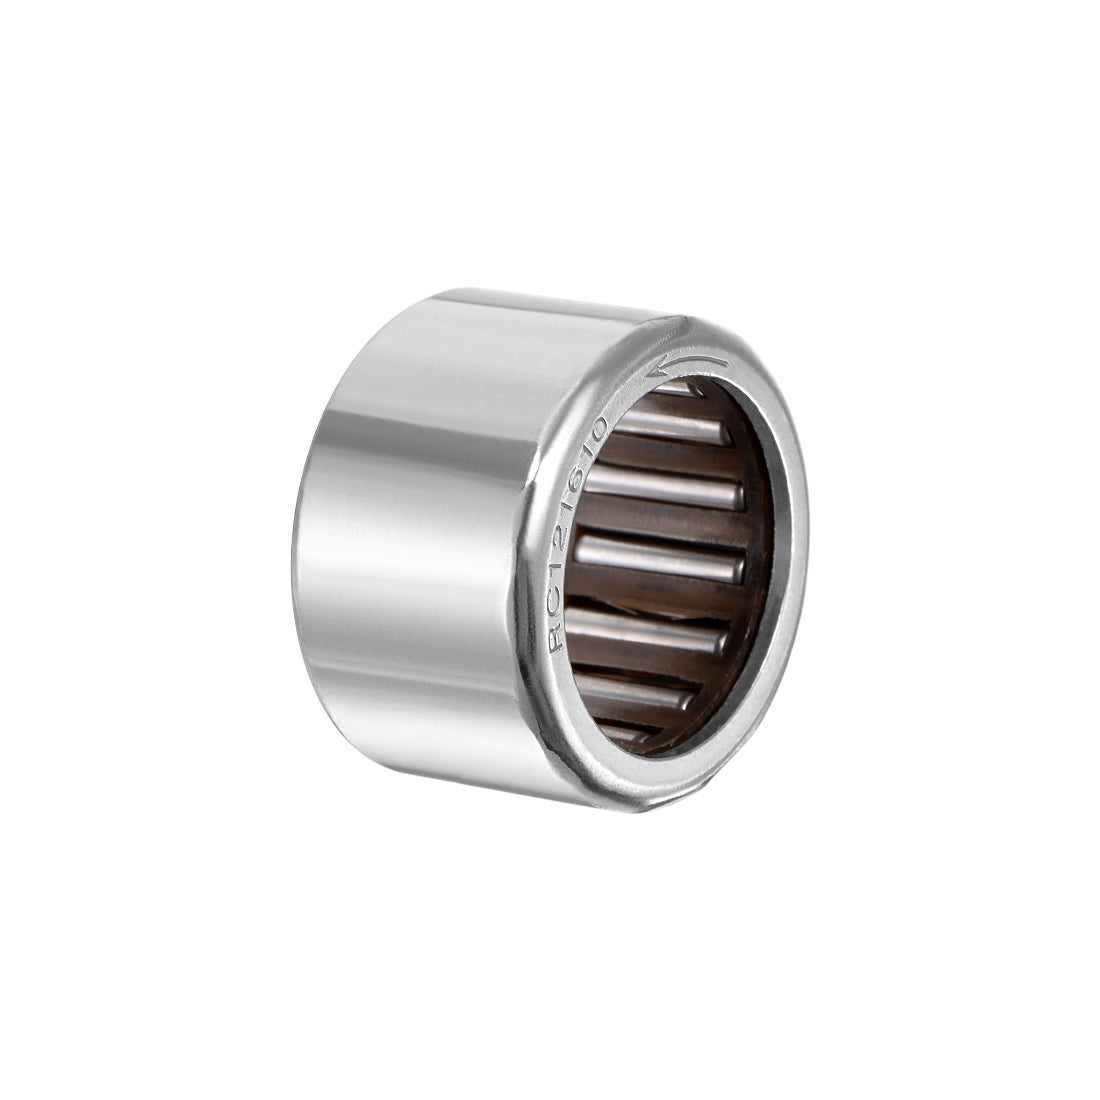 uxcell Uxcell RC081208 Needle Roller Bearings, One Way Bearing, 1/2" Bore 3/4" OD 1/2" Width